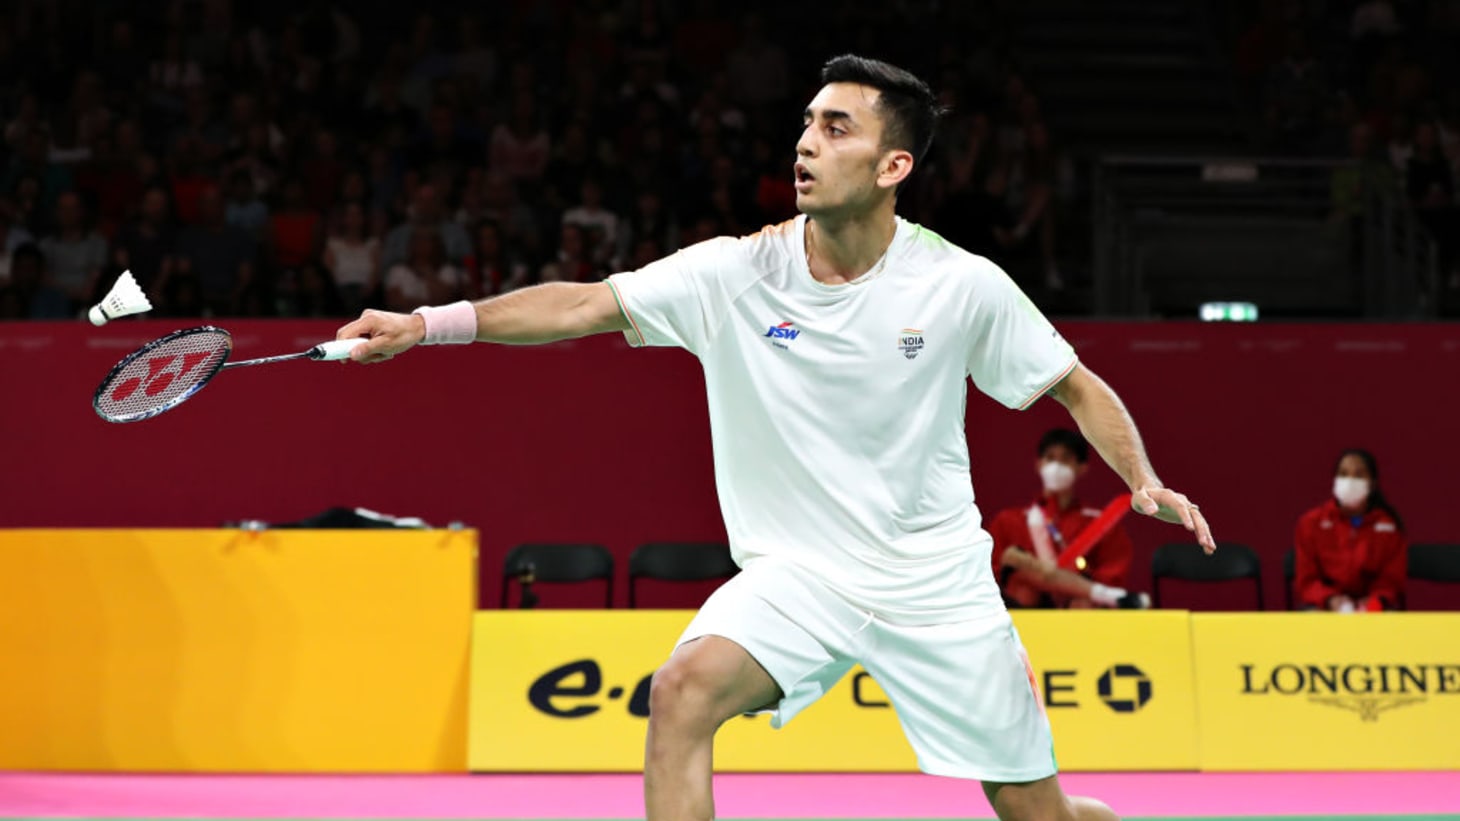 french open badminton 2022 live streaming